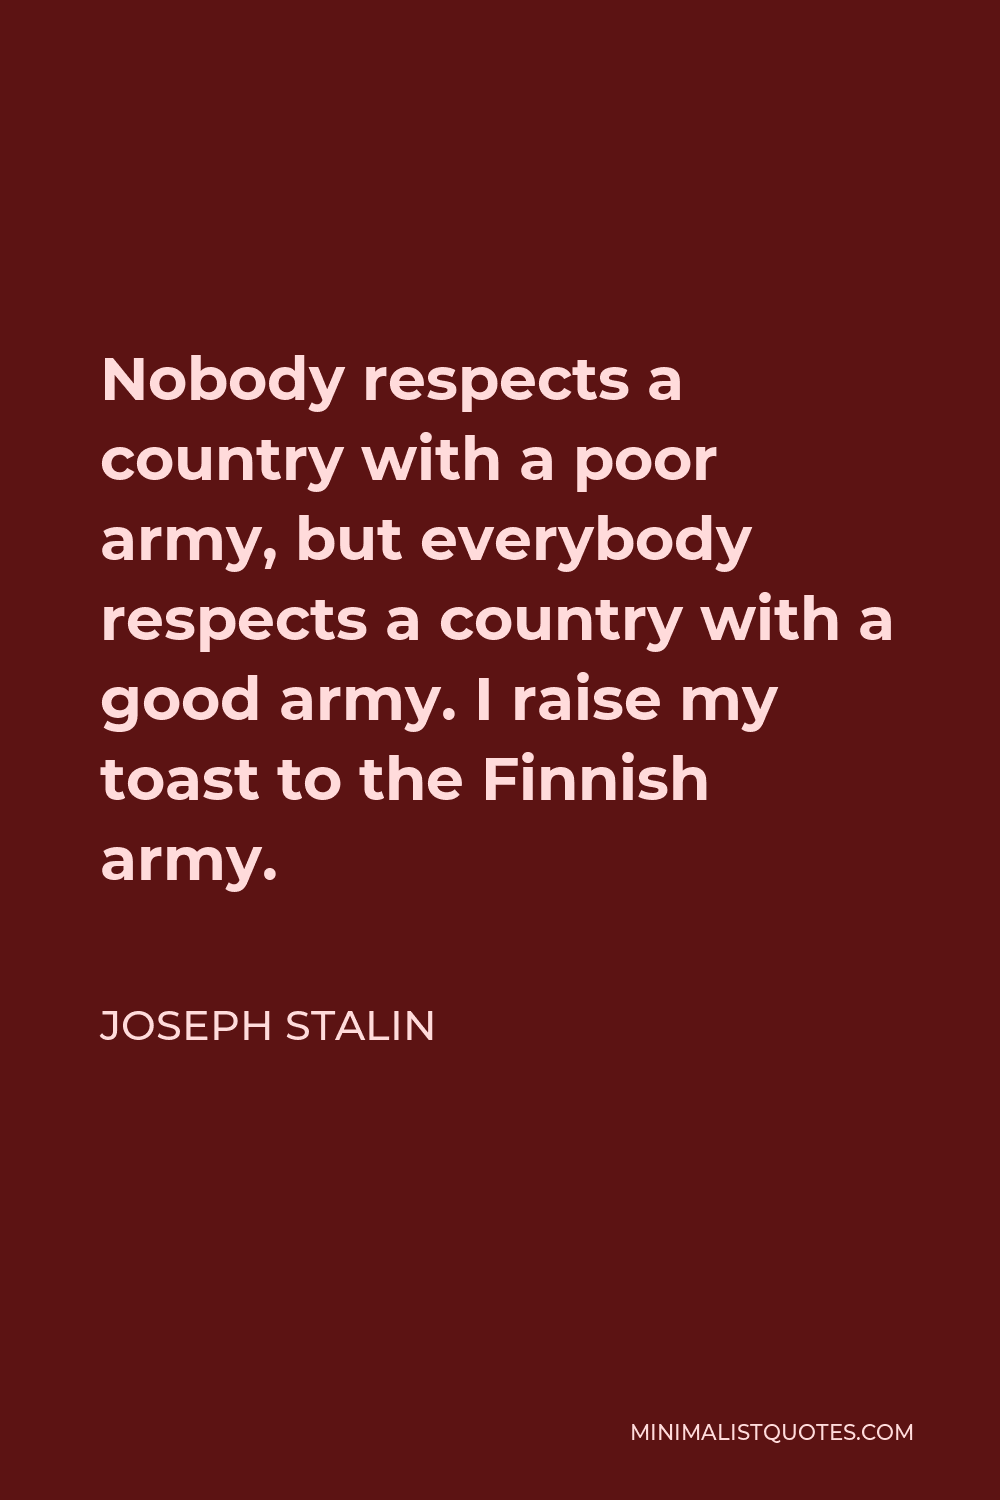 Joseph Stalin Quote - Nobody respects a country with a poor army, but everybody respects a country with a good army. I raise my toast to the Finnish army.